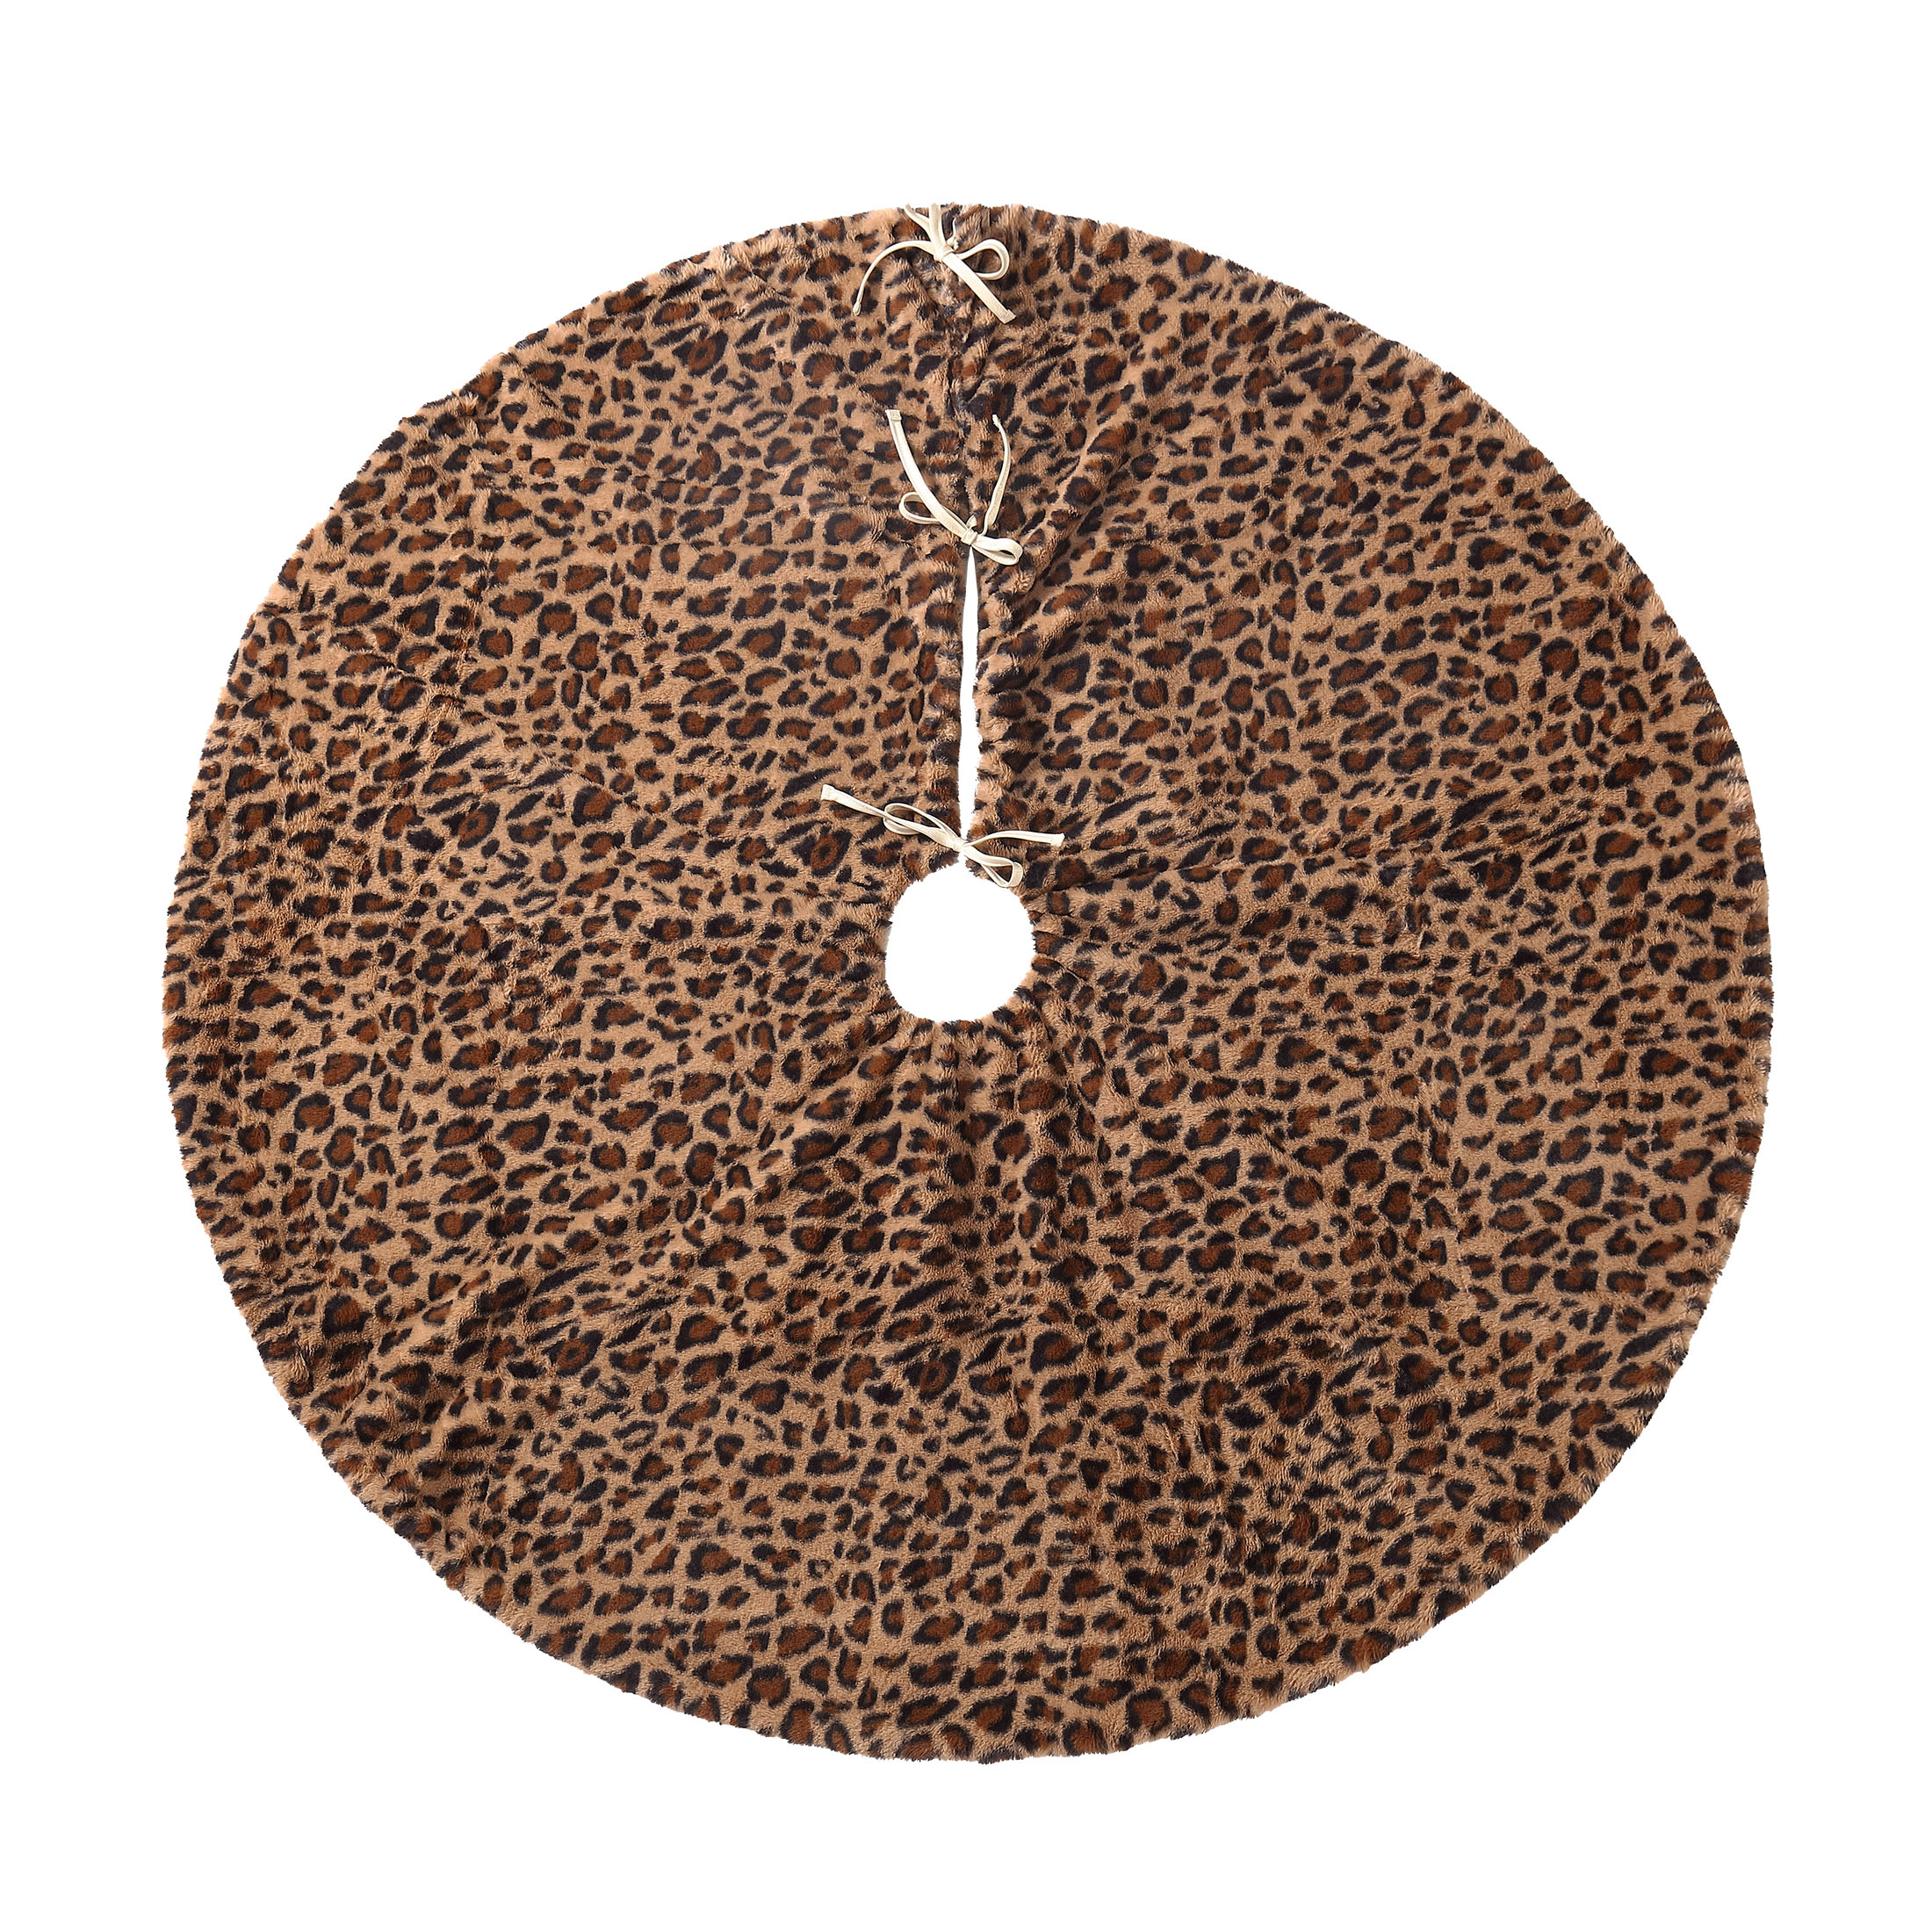 Holiday Time, Rabbit Faux Fur Leopard Print Tree Skirt, 56" - image 3 of 5